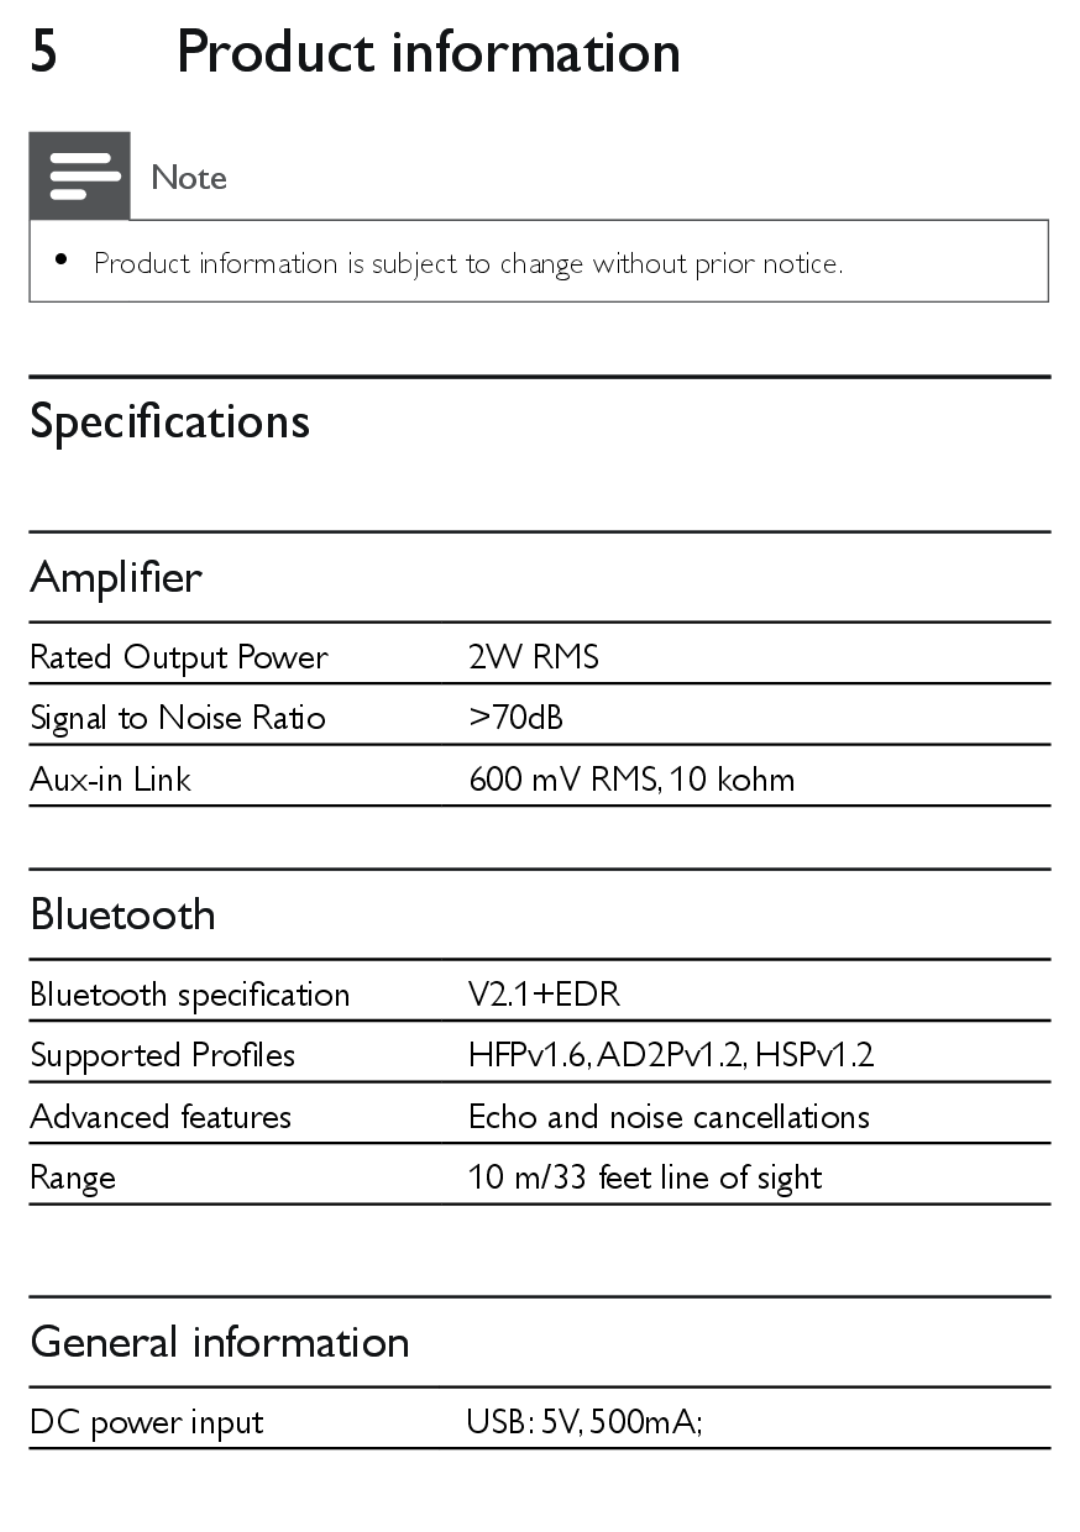 Philips SBT30 user manual Product information, Specifications, Amplifier, Bluetooth, General information 